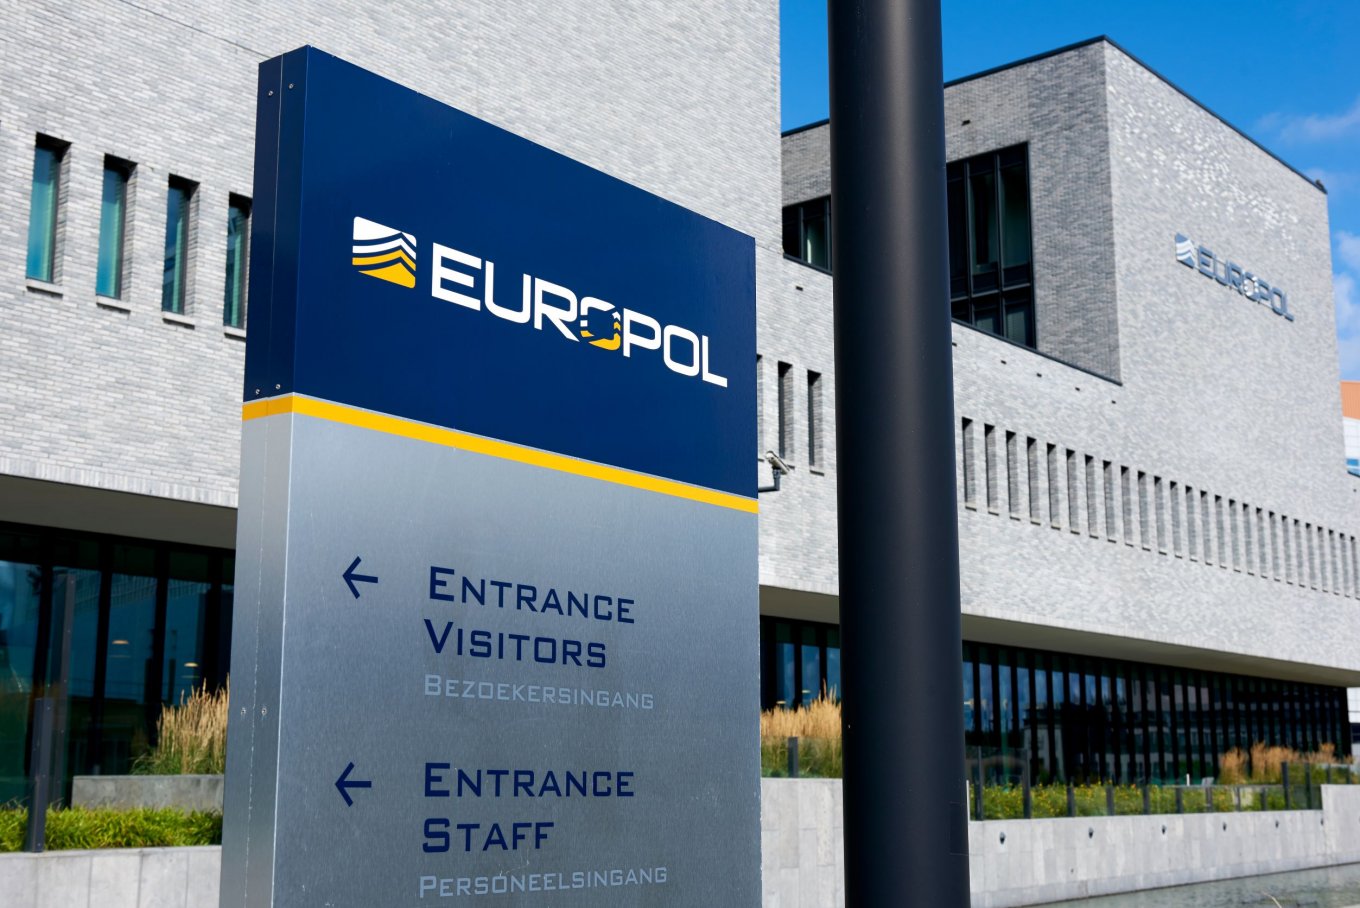 Europol launched an operation targeting the assets of Russian individuals and companies, Defense Express